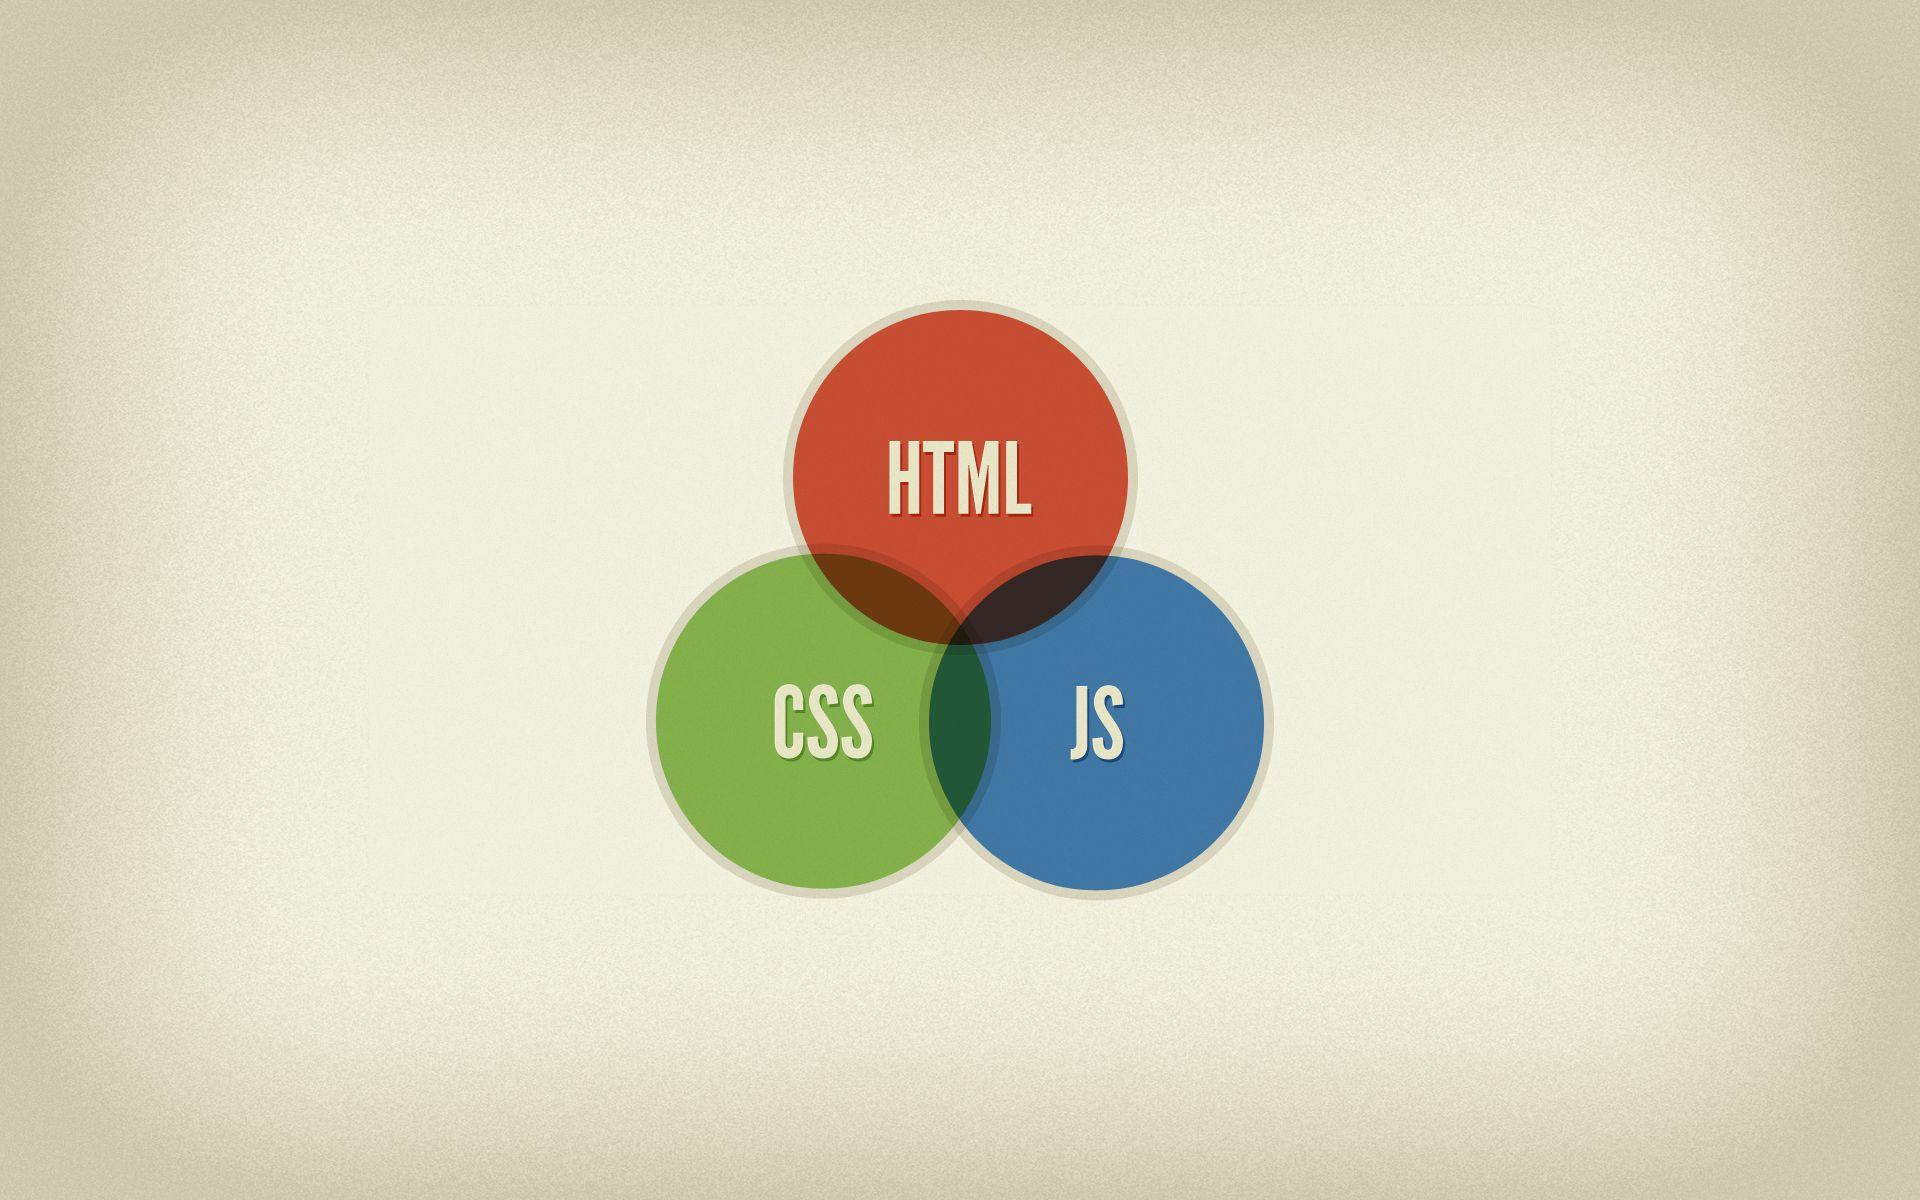 JavaScript Projects to Advance Your CSS3 Animations